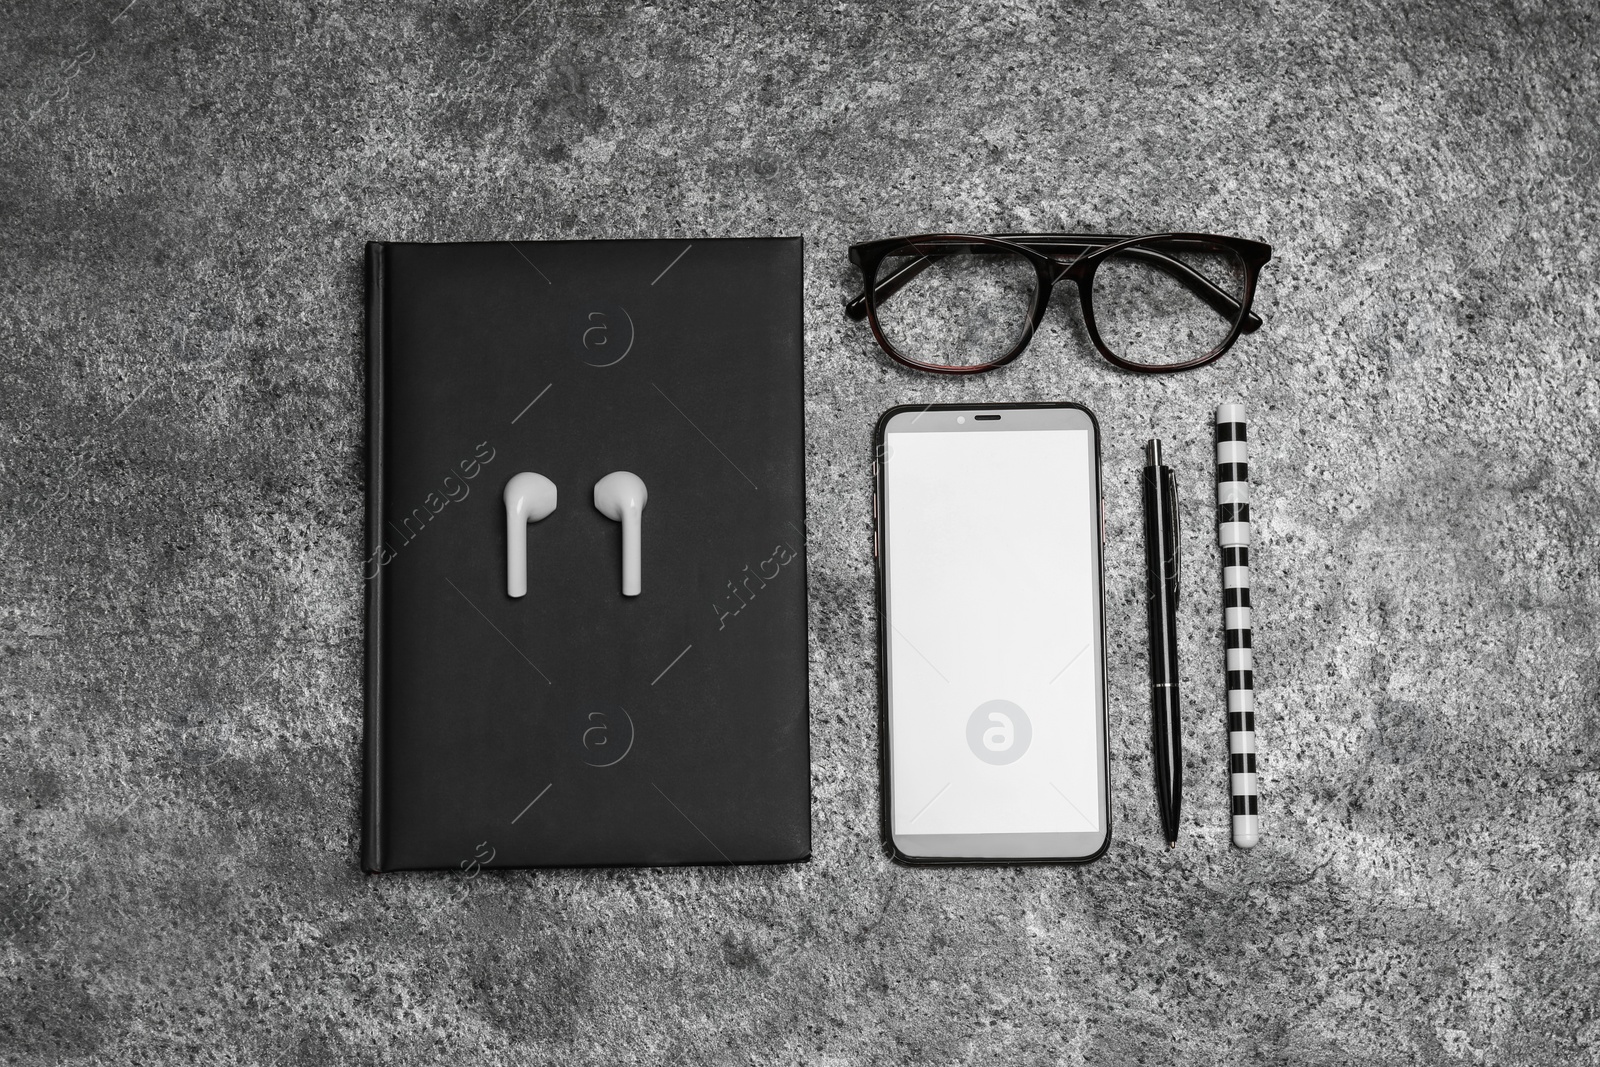 Photo of Flat lay composition with notebook and smartphone on grey background